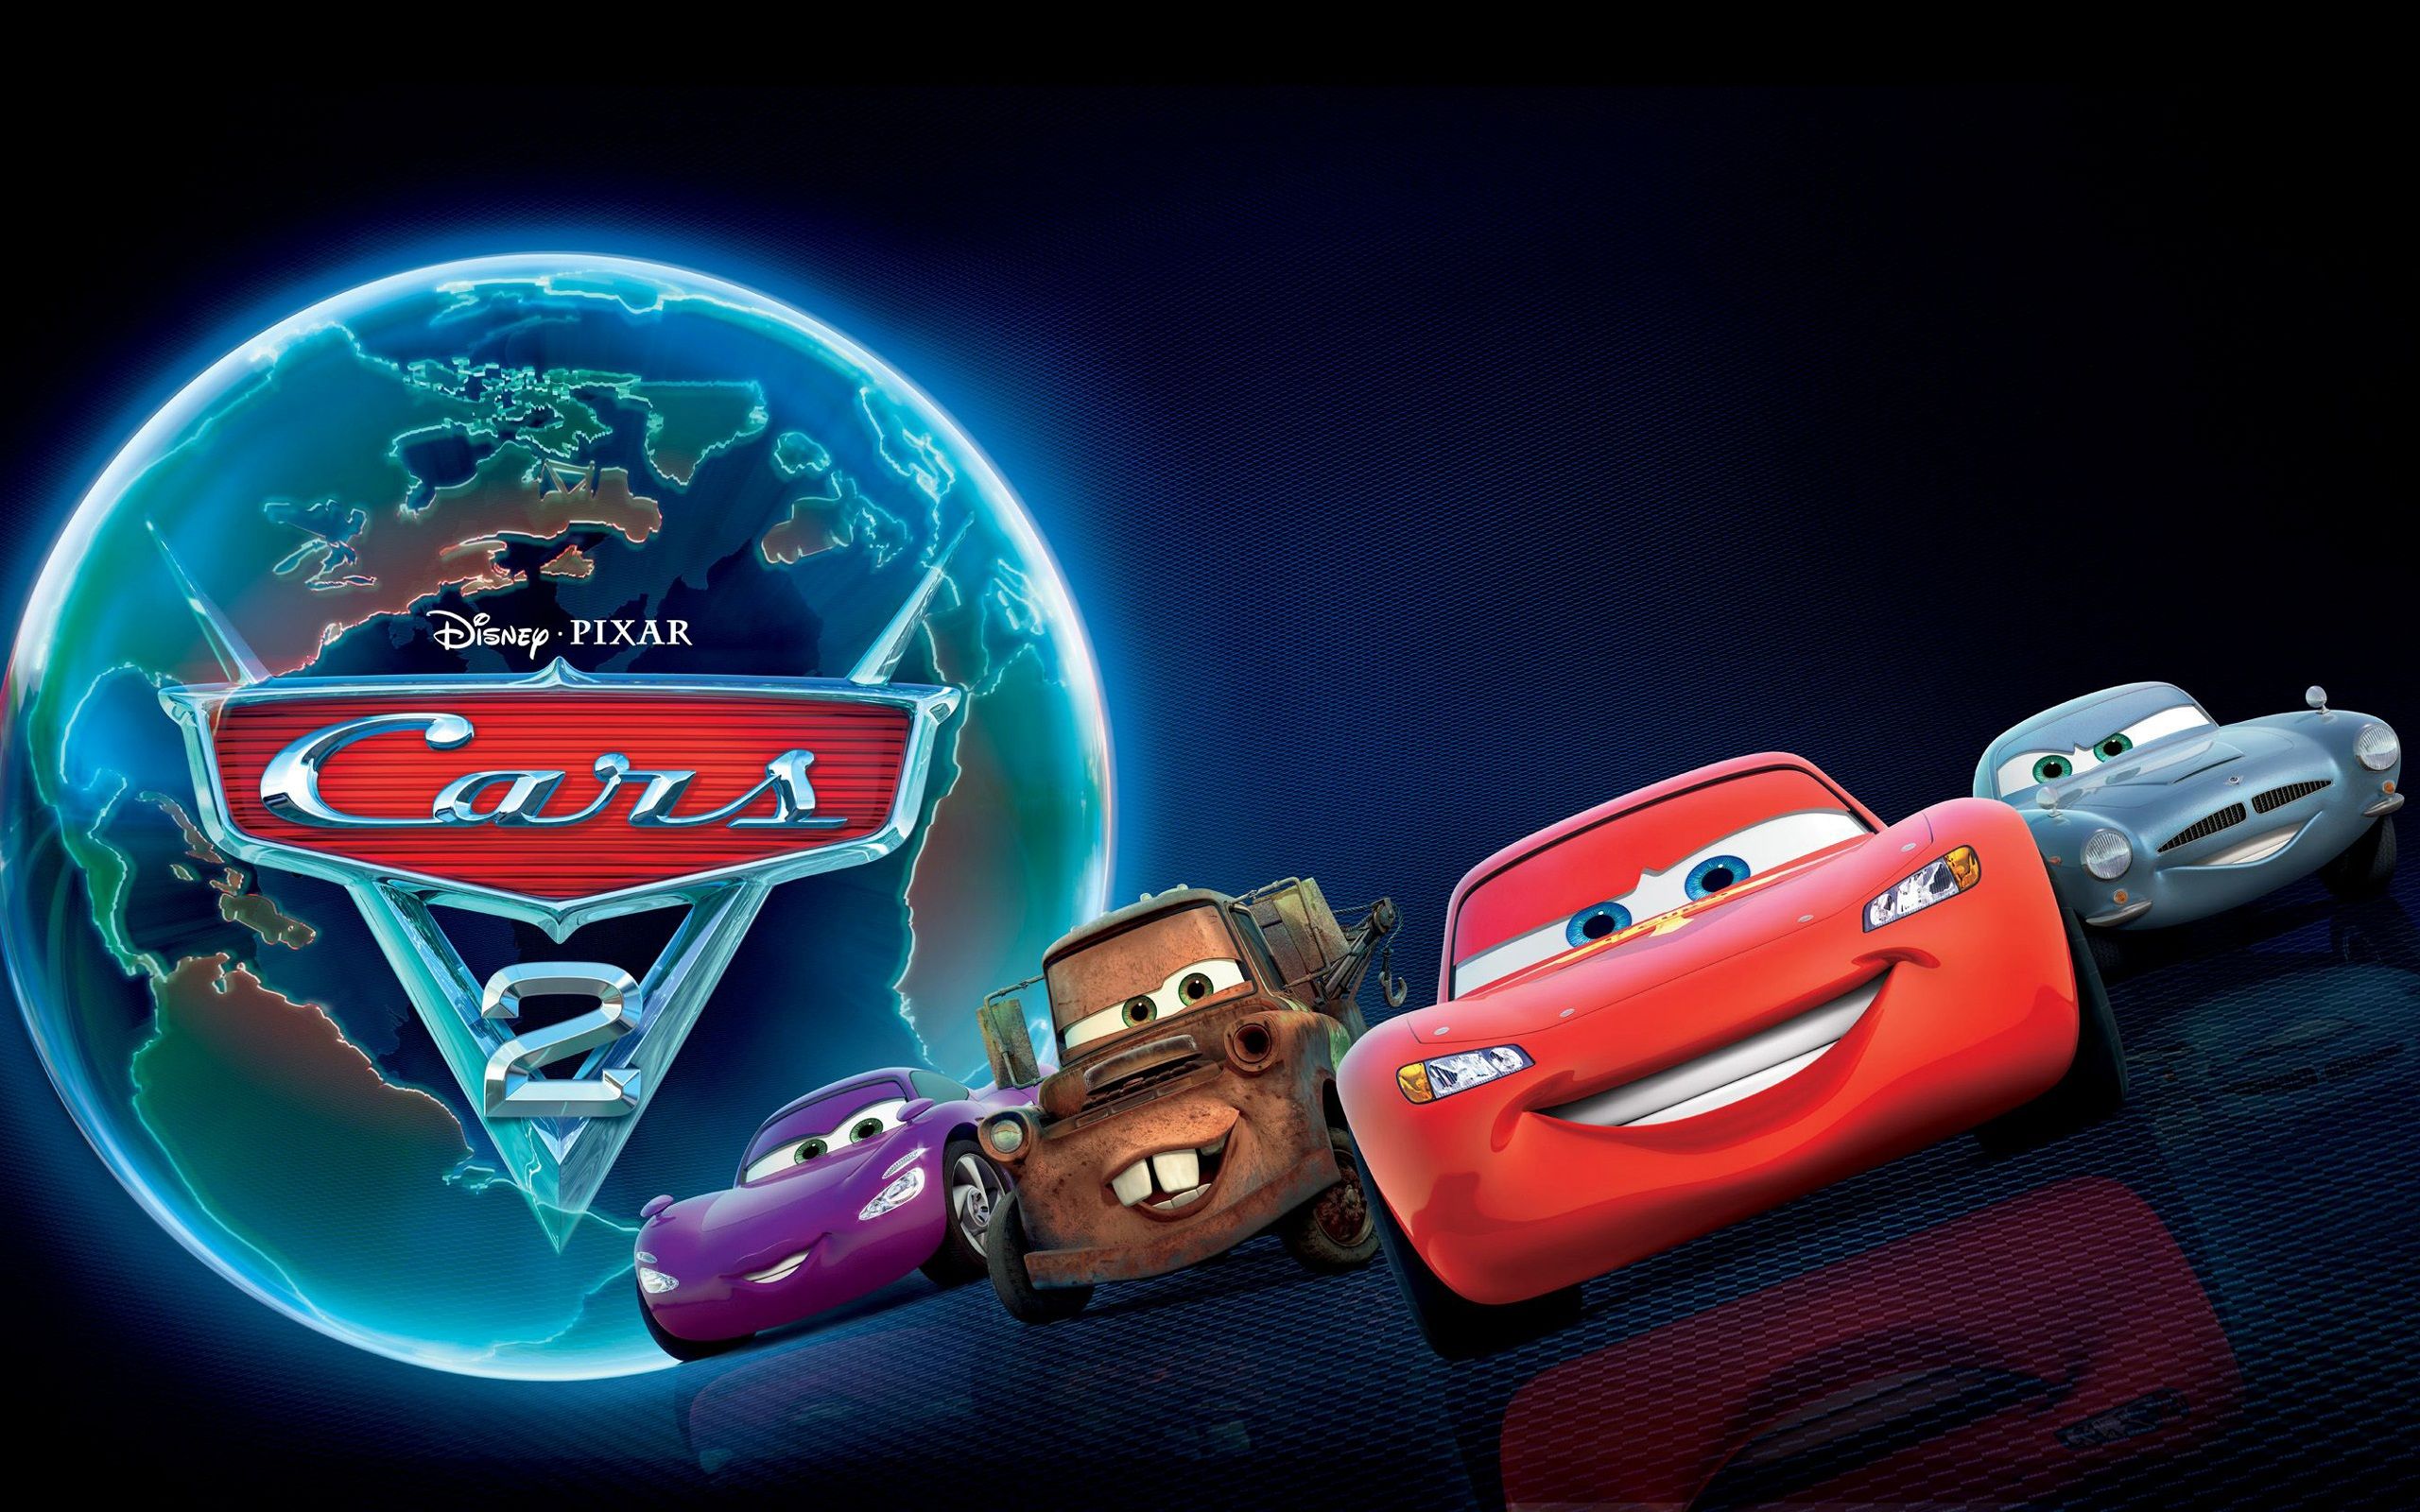 Cars 2 Wallpaper. Awesome Cars Wallpaper, Disney Cars Wallpaper and Cool Cars Wallpaper